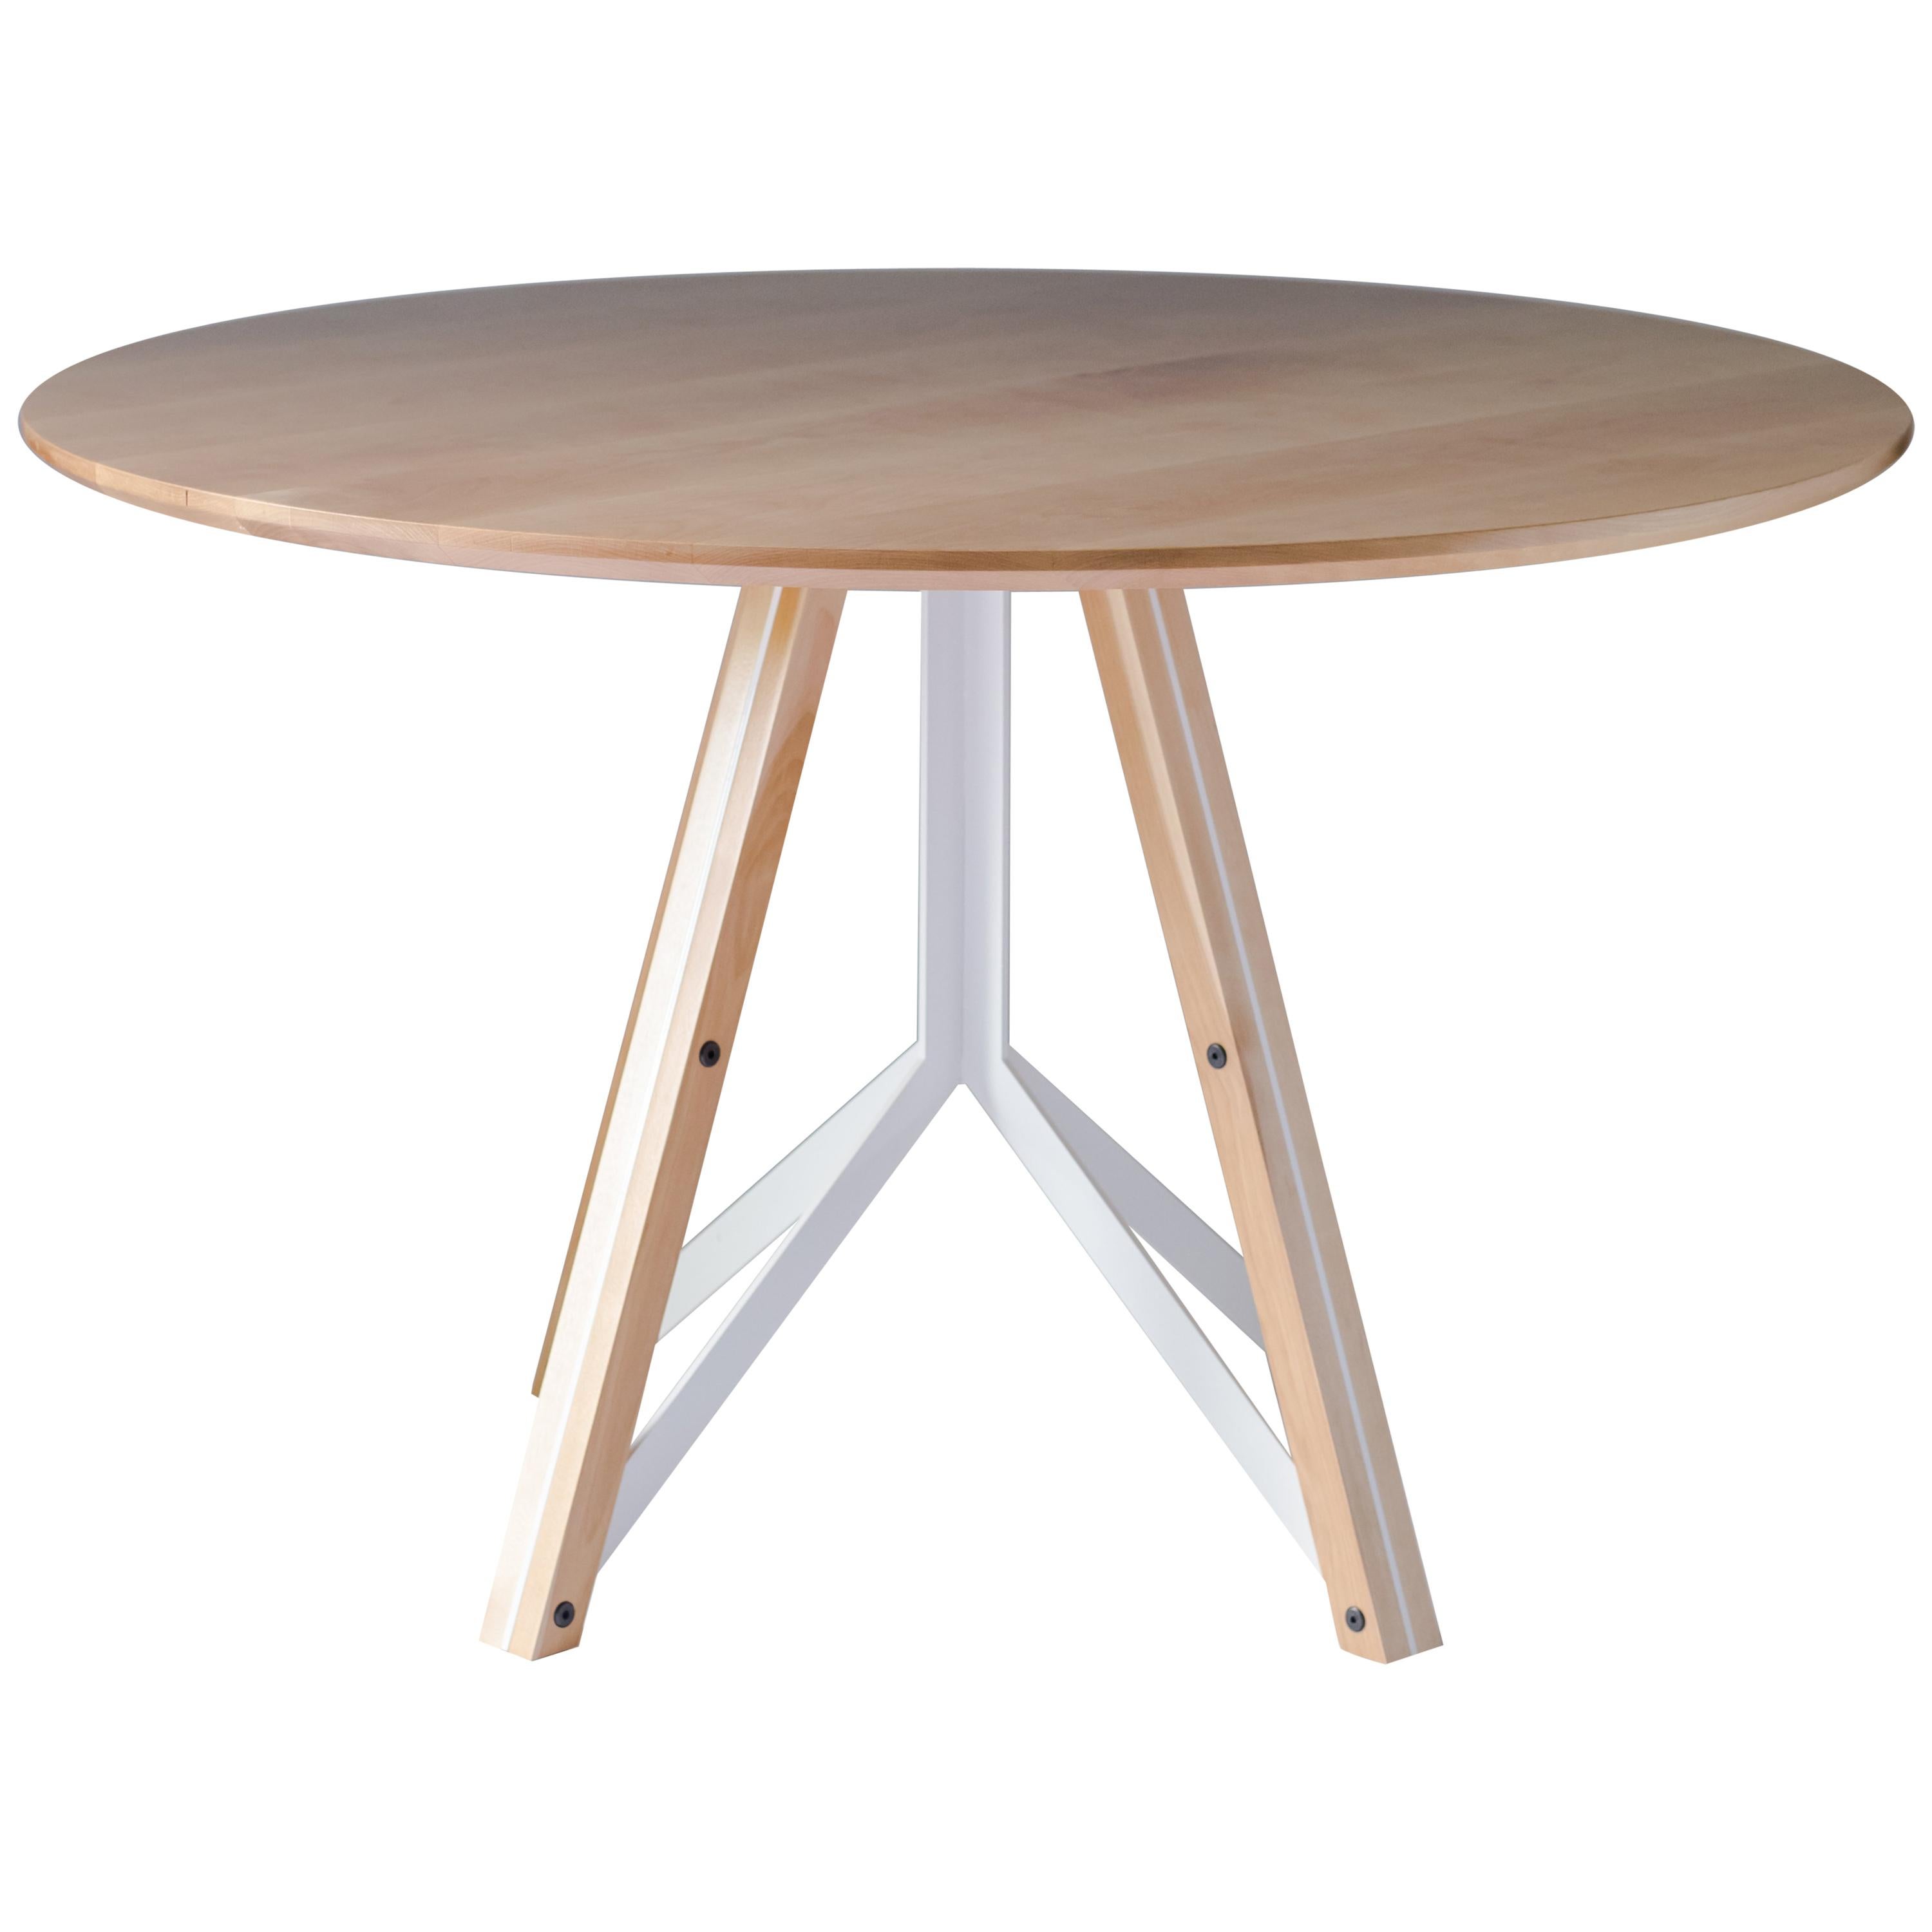 Trestle, Modern Birch and Powder Coated Steel Round Dining Table